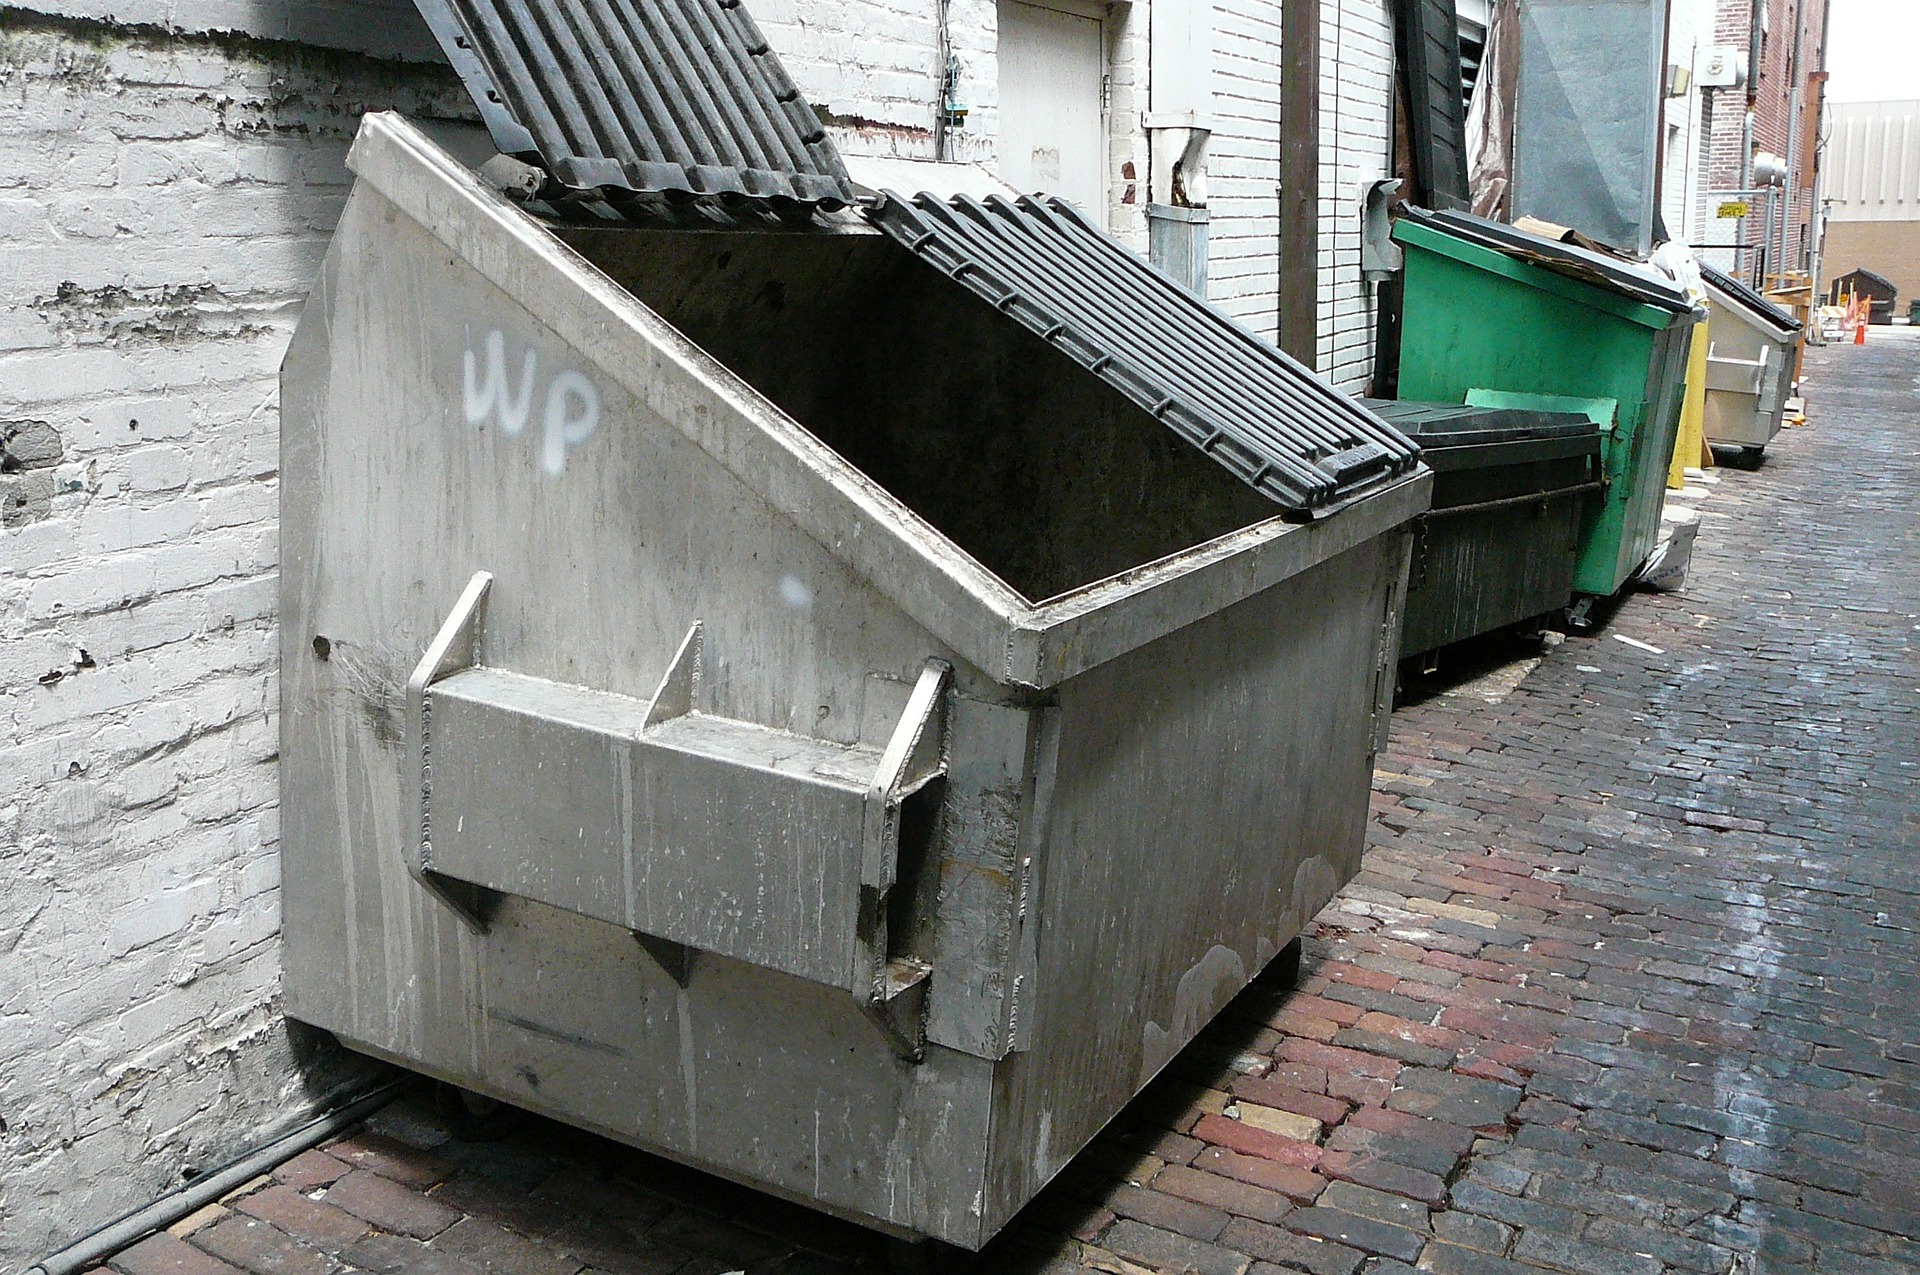 Factors you should consider when taking dumpsters on re